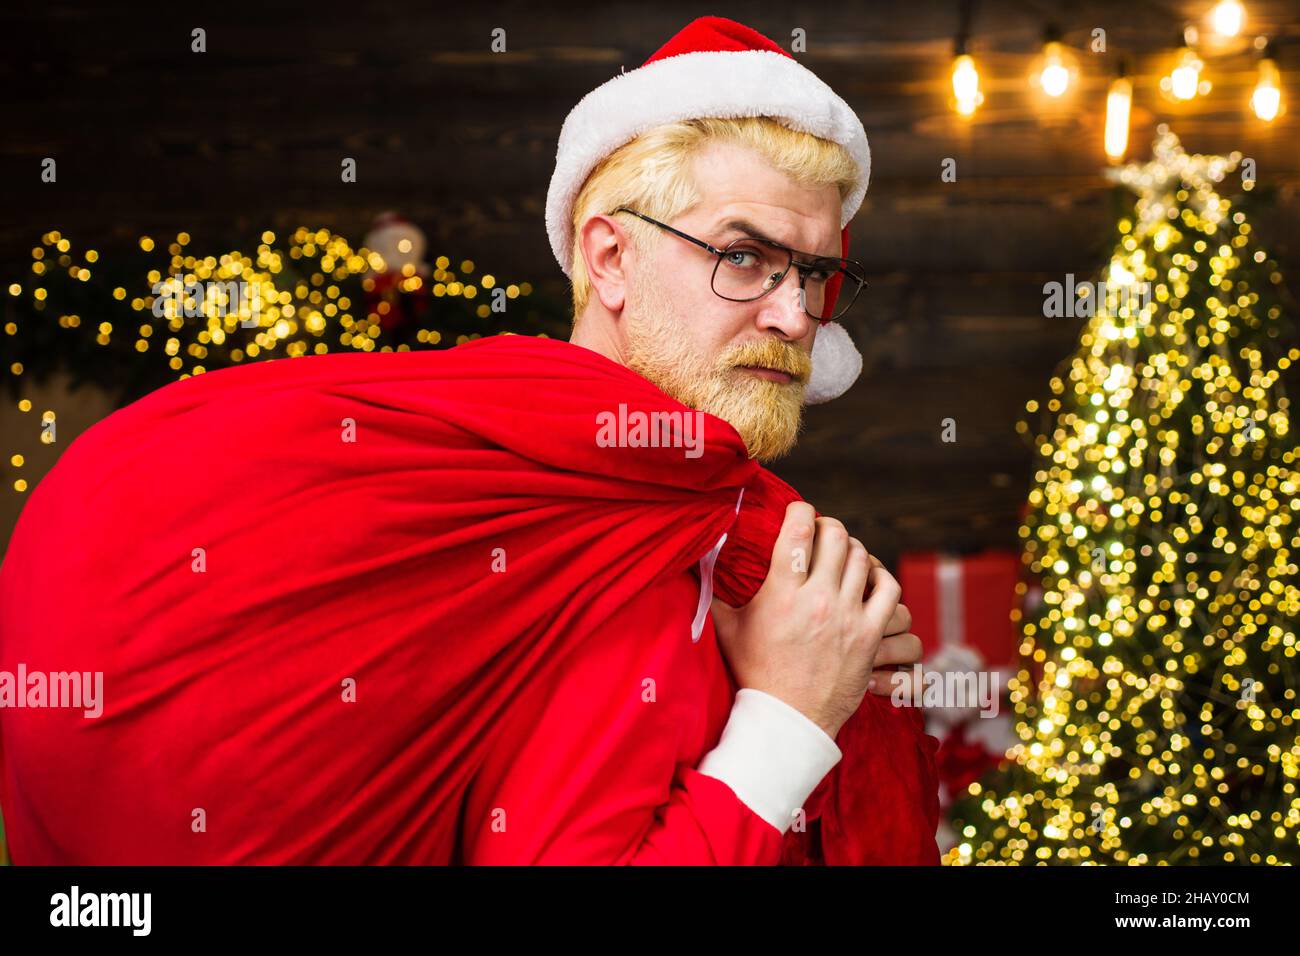 Santa Claus carrying red bag with presents. Delivery christmas gifts. New year advertising Stock Photo